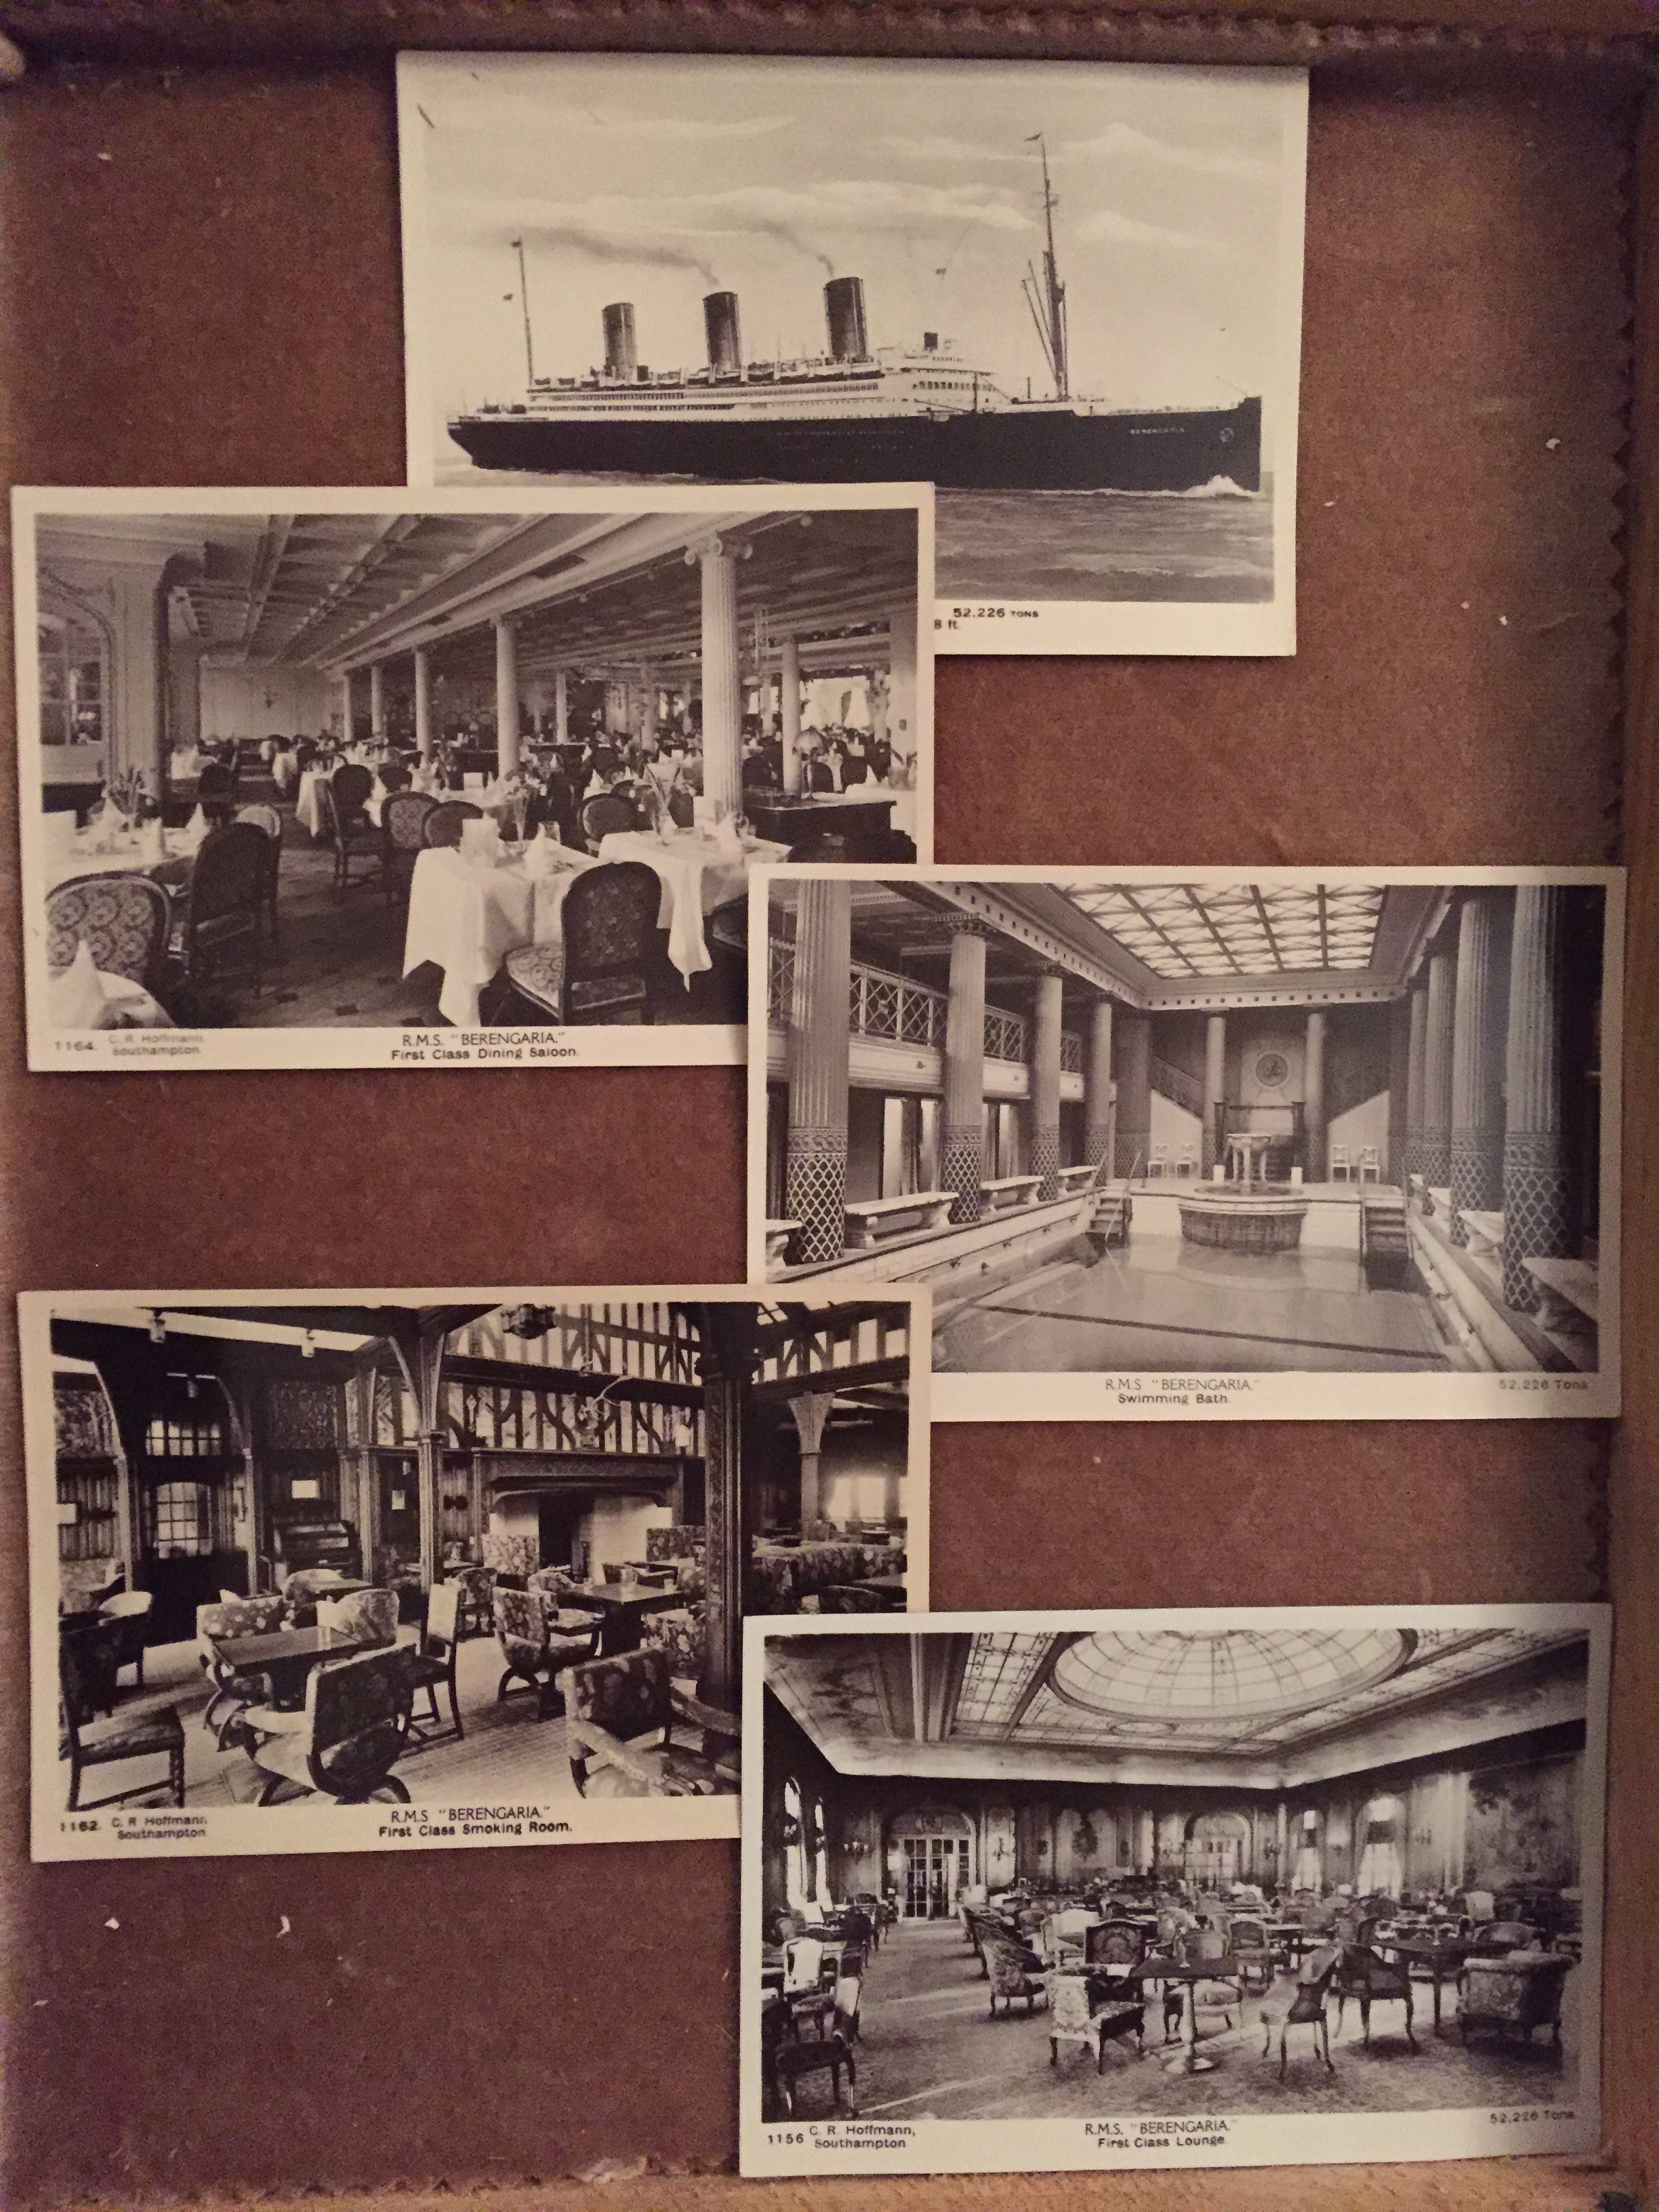 SET OF 5 UNUSED B/W POSTCARDS FROM THE OLD CUNARD LINE VESSEL THE BERENGARIA